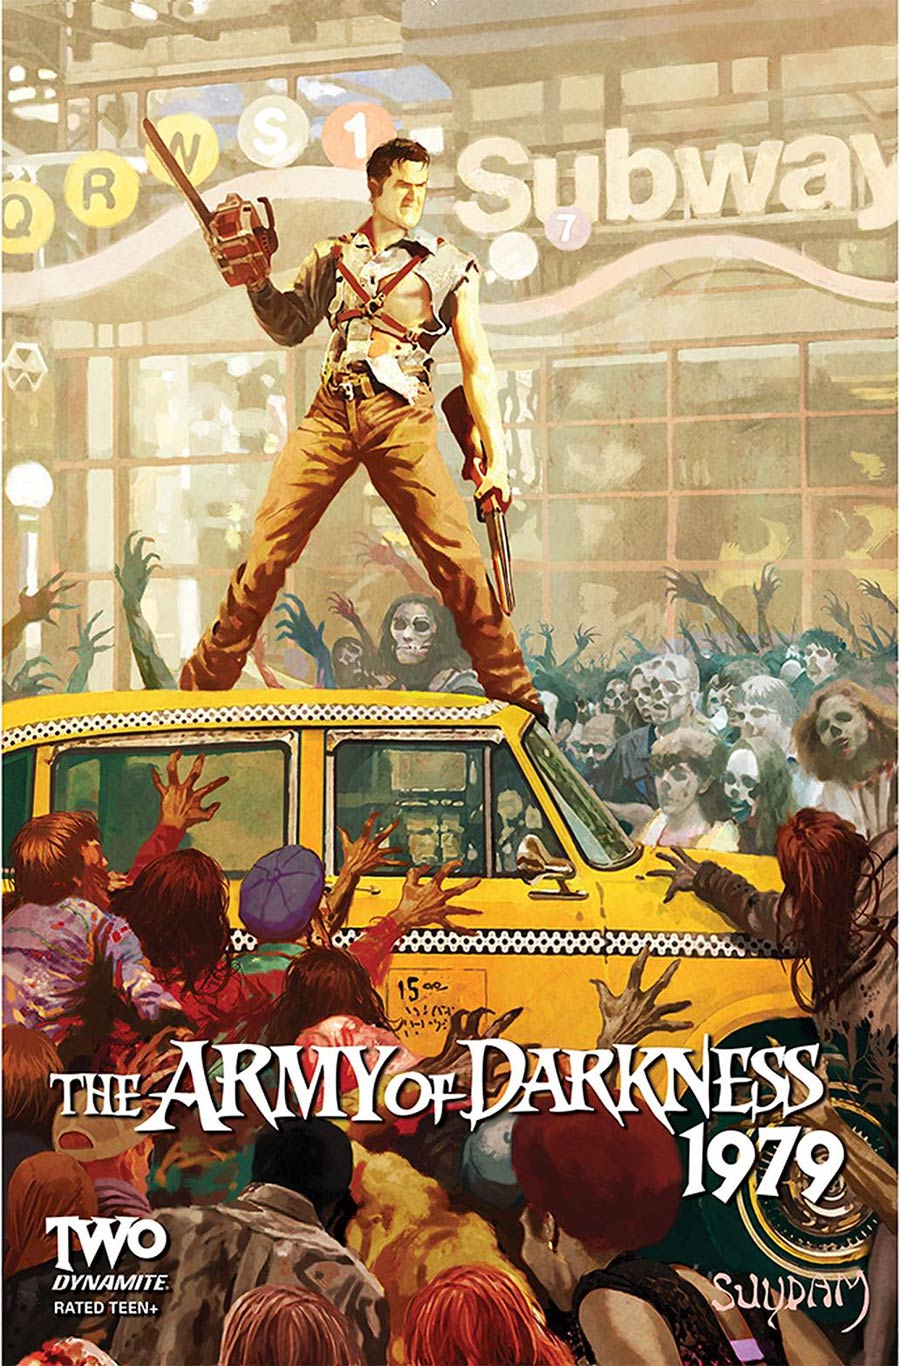 Army Of Darkness 1979 #2 Cover B Variant Arthur Suydam Cover